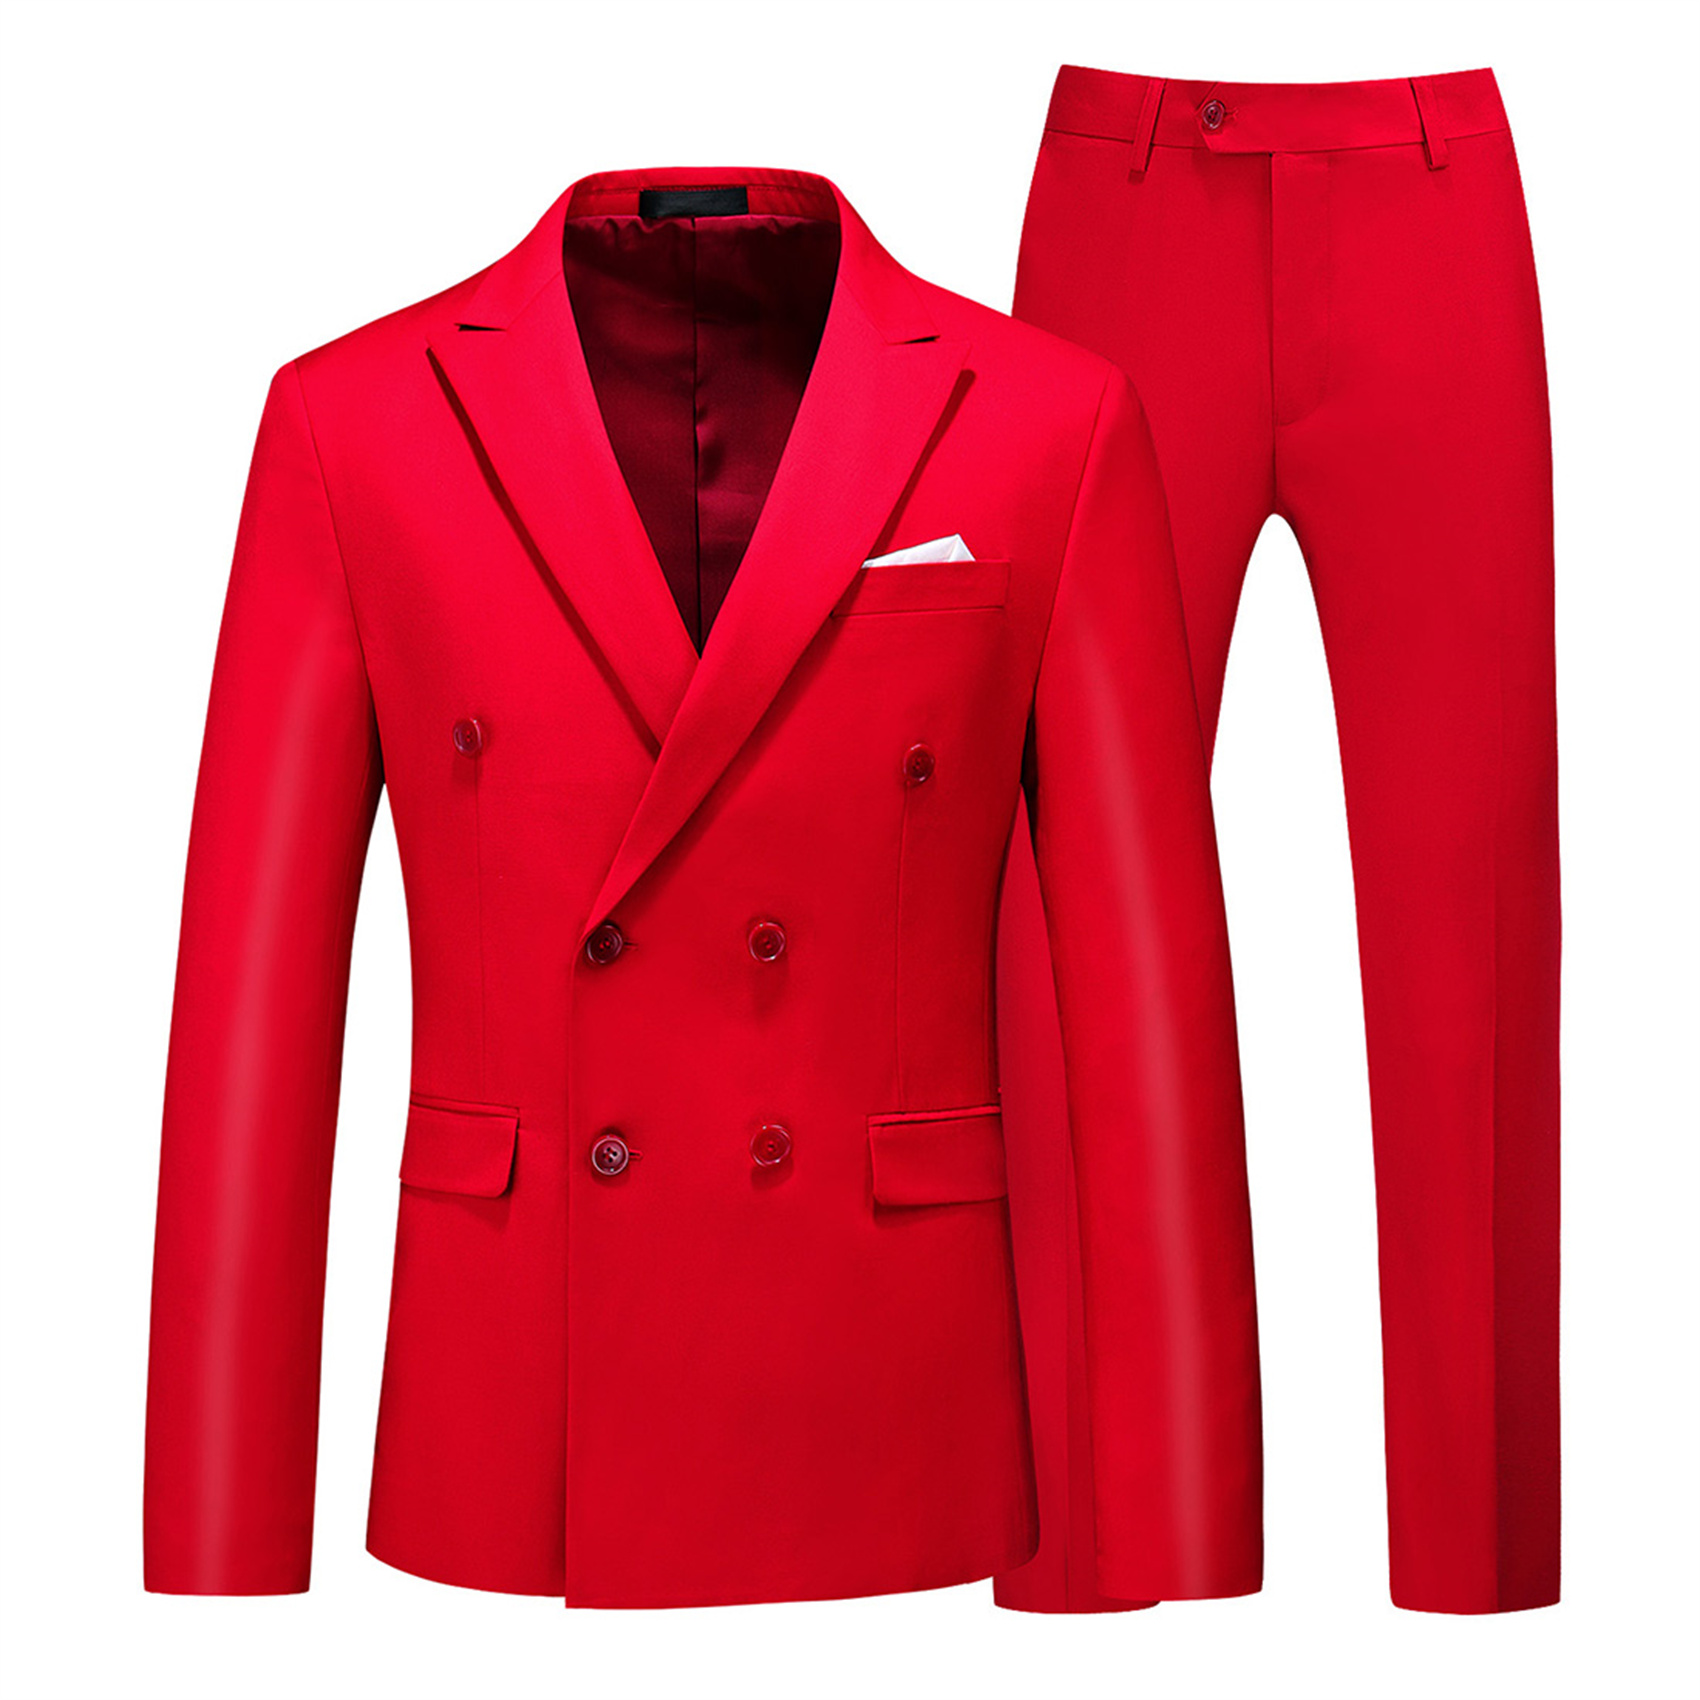 2 Piece Double Breasted Suit for Men, Slim Fit, Red